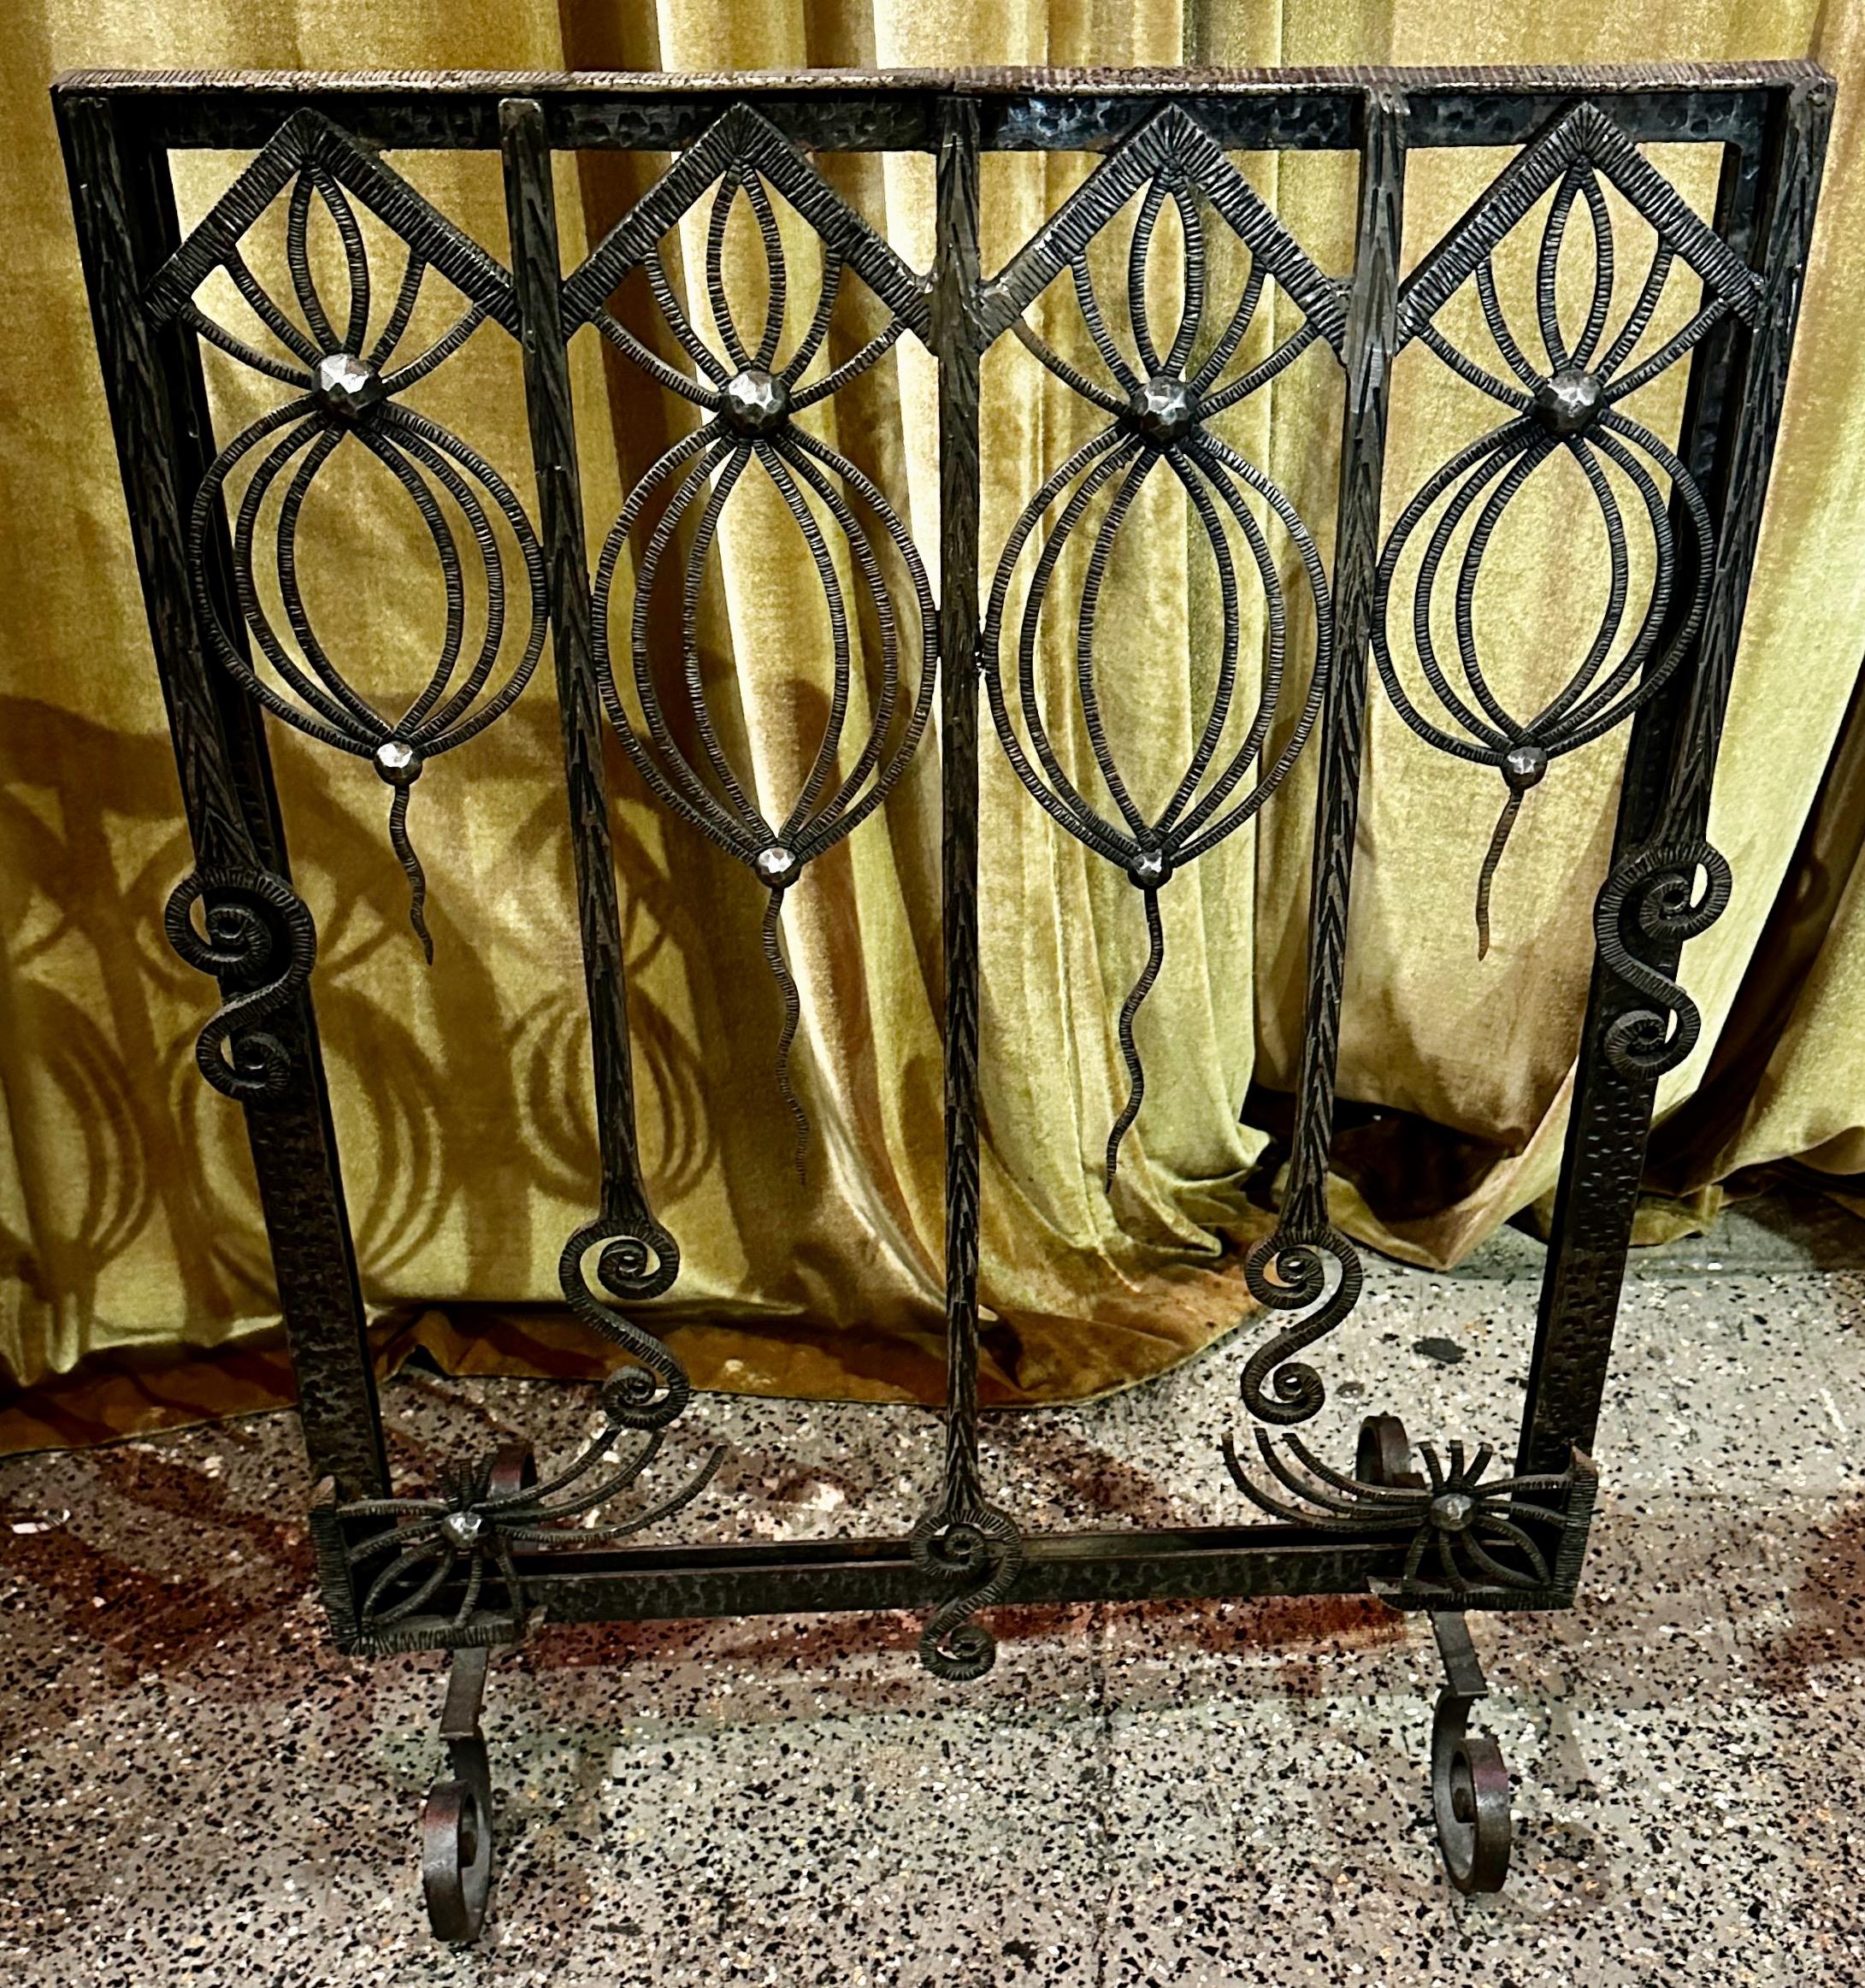 Art Deco Firescreen French Ironwork Fer Forge. Stunning panel with repetitive abstract balloon design. Original from the 1920s era. It is made with a small pocket on the back to allow you to install a screen to protect from wood fire bursts. It